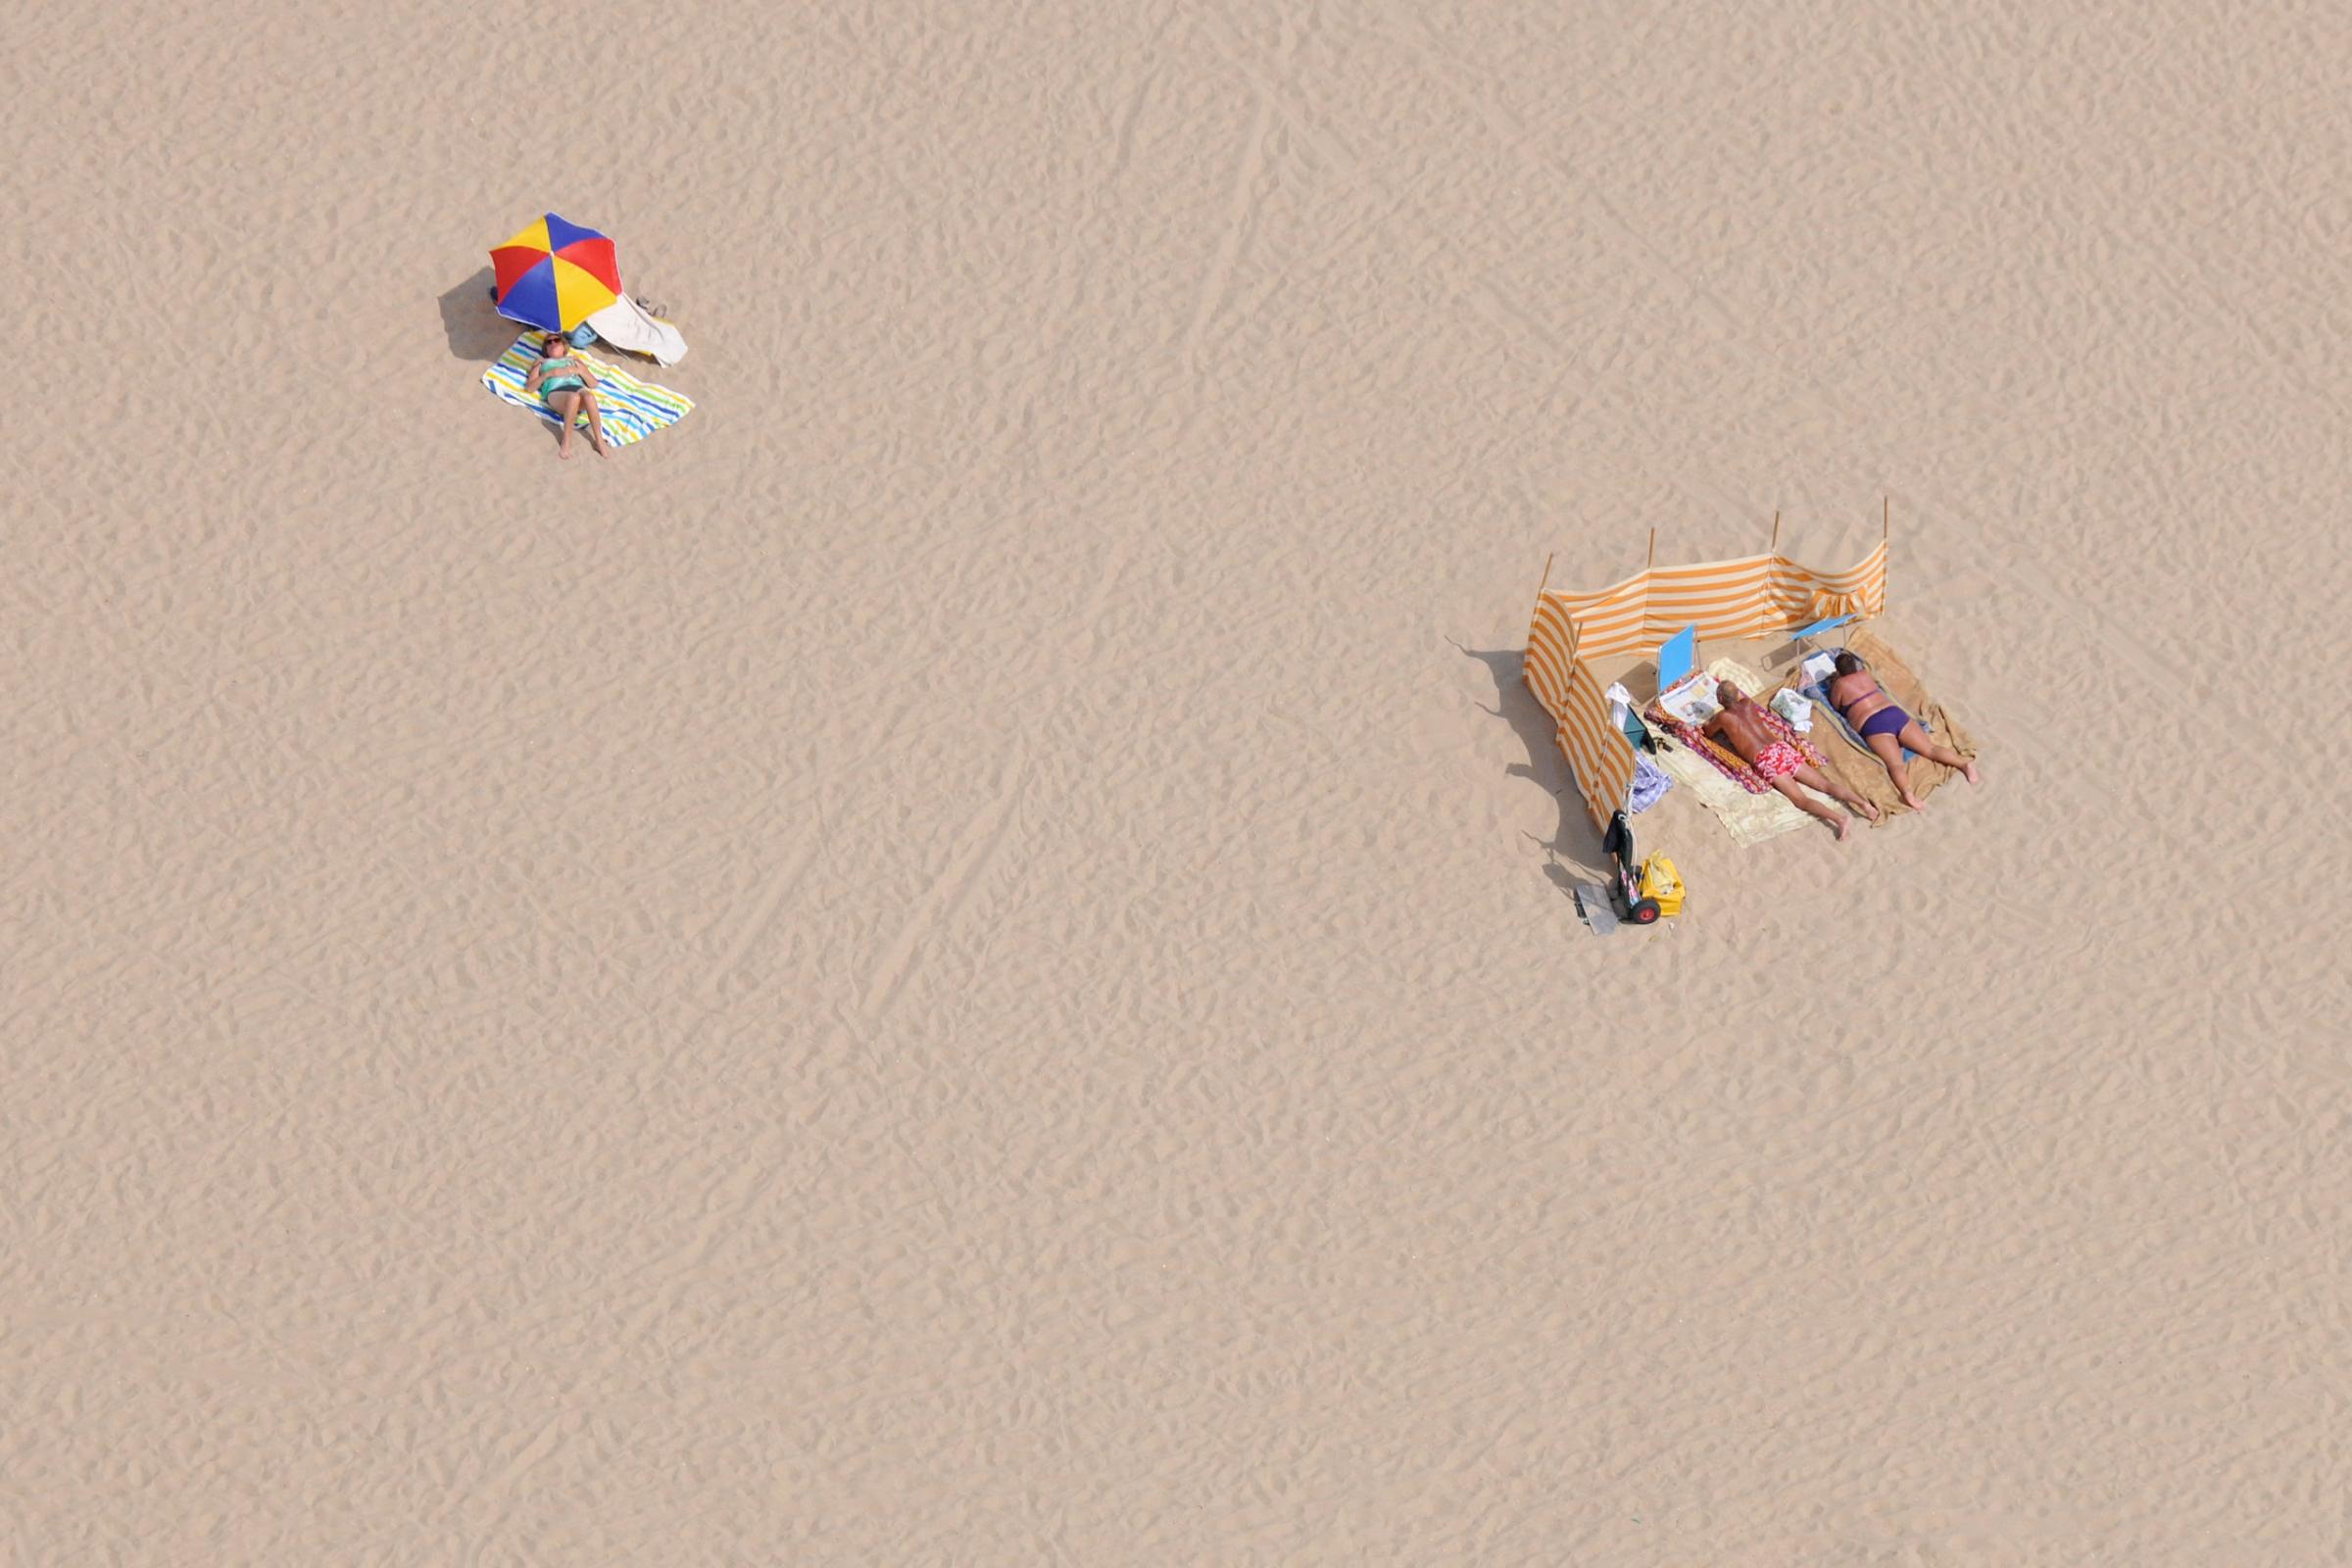 Sunbathers from Above